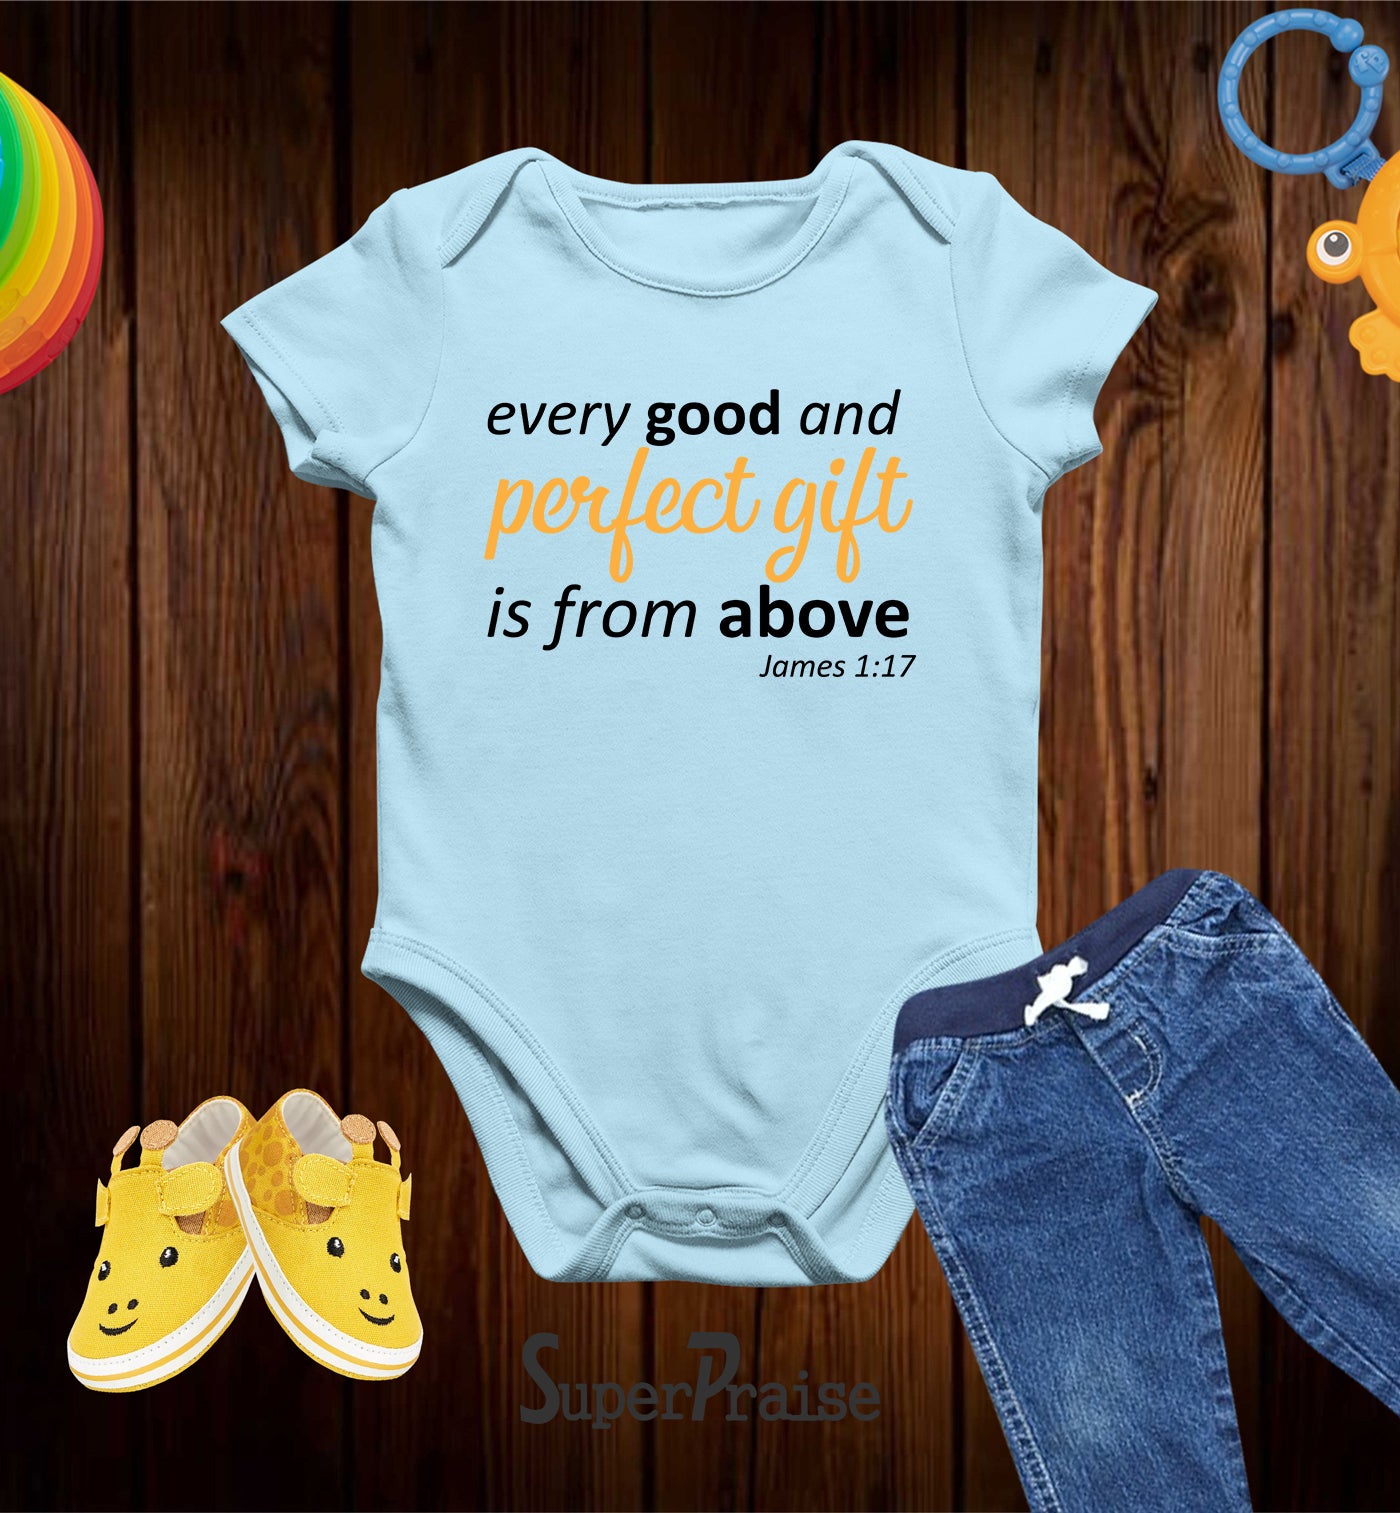 Every Good And Perfect Gift is From Above Bible Verse Christian Baby Bodysuit